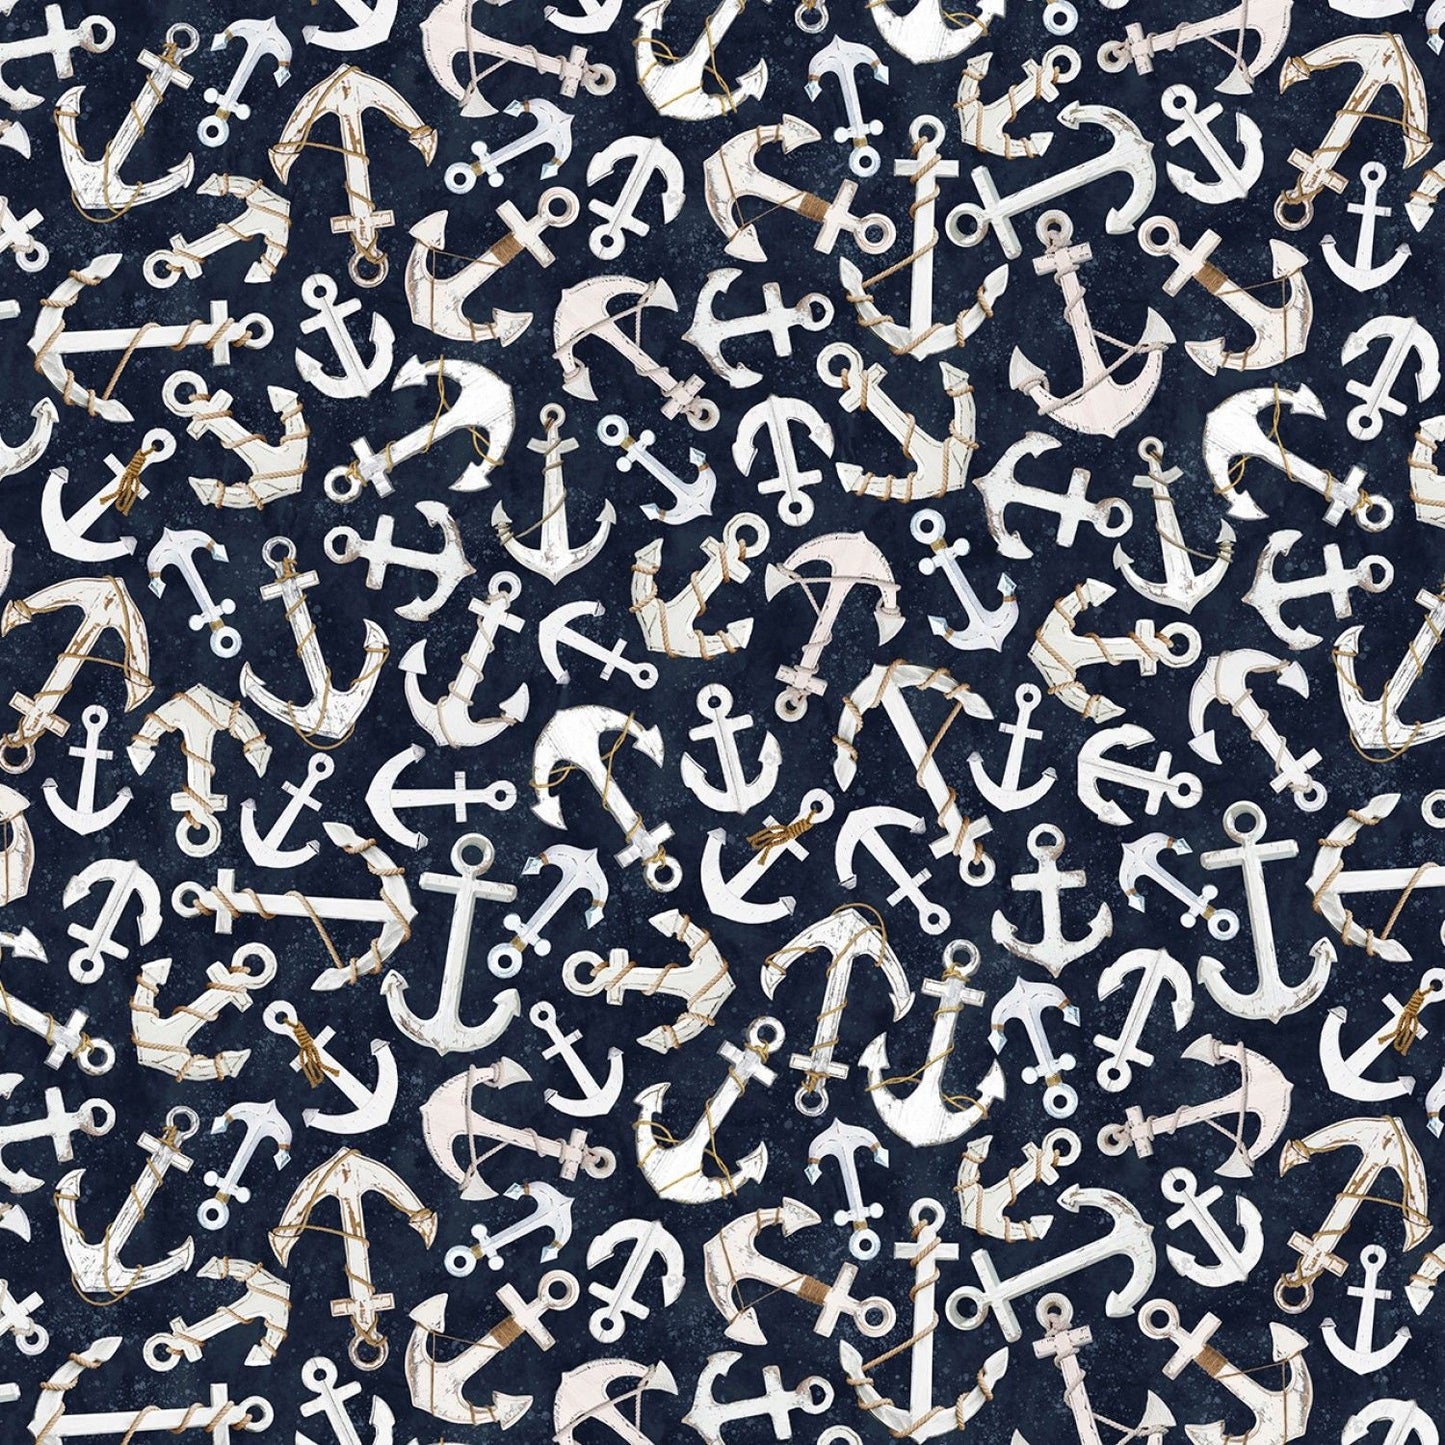 Welcome to The Beach Anchors Navy C8288-NAVY Cotton Woven Fabric